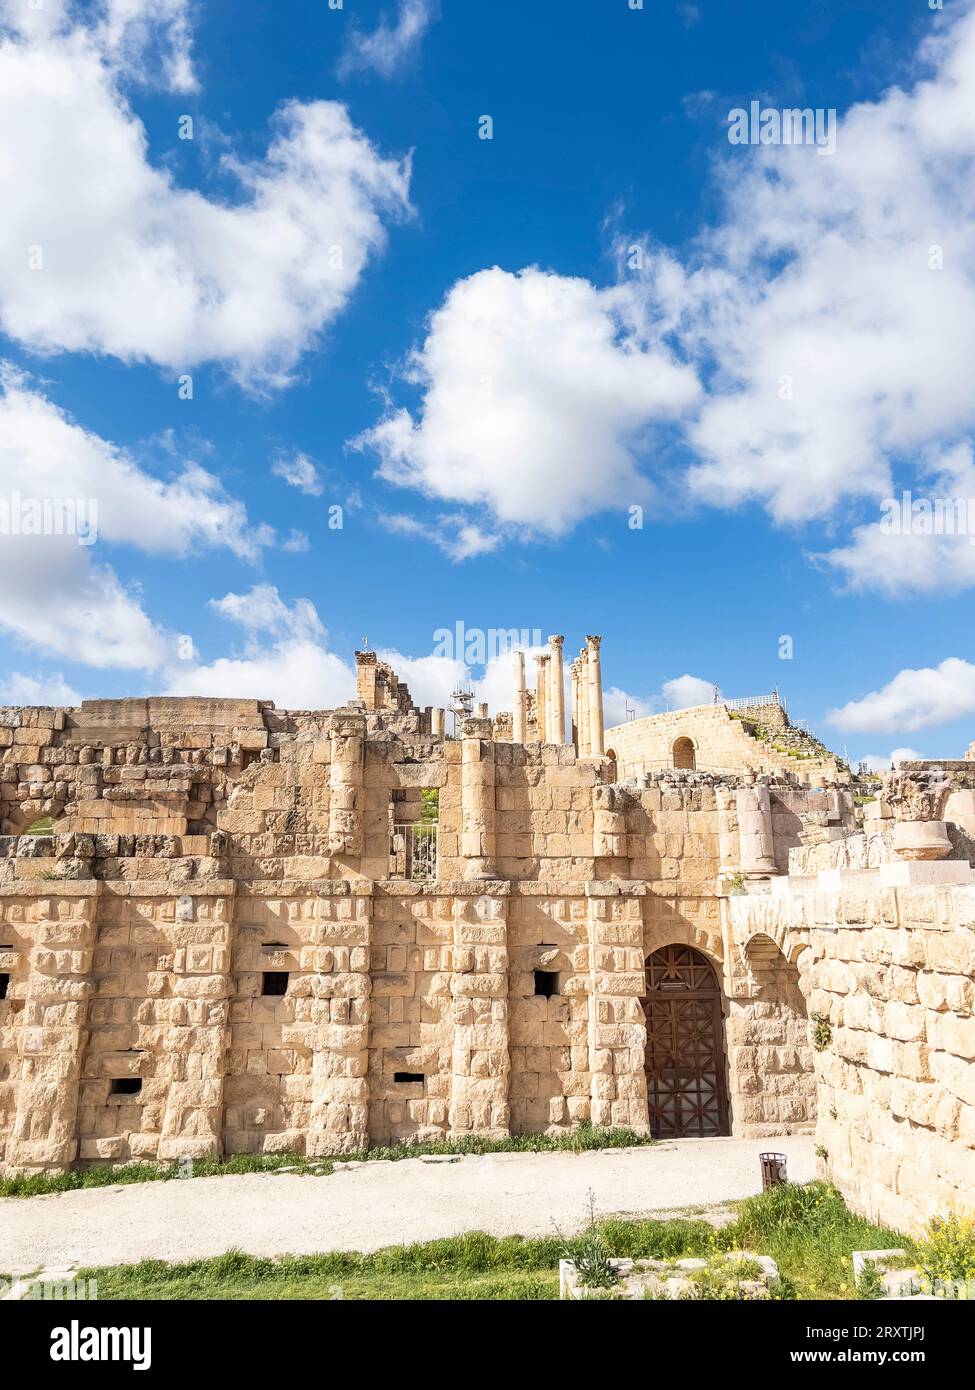 Crumbled ruins in the ancient city of Jerash, believed to have been founded in 331 BC by Alexander the Great, Jerash, Jordan, Middle East Stock Photo